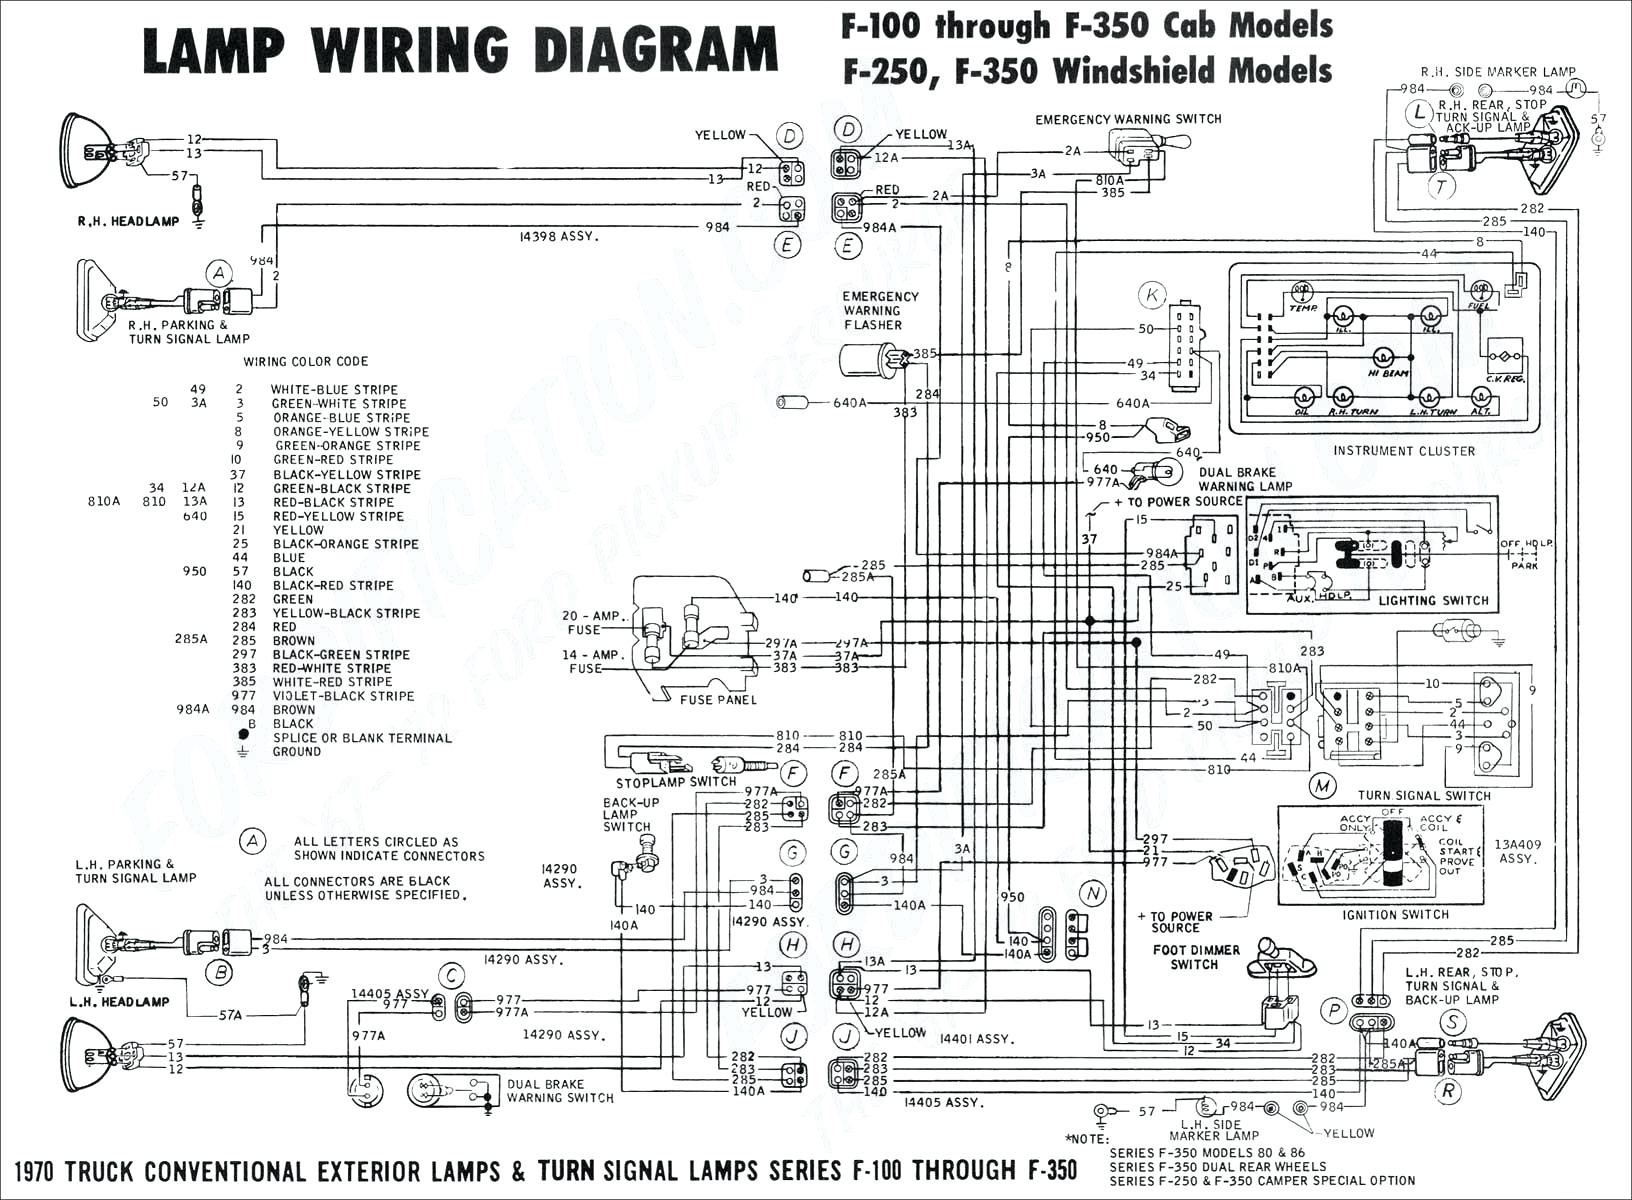 Wiring Diagram ford F150 Stop Turn Tail Light Wiring Diagram Beautiful 1979 ford F150 Tail Of Wiring Diagram ford F150